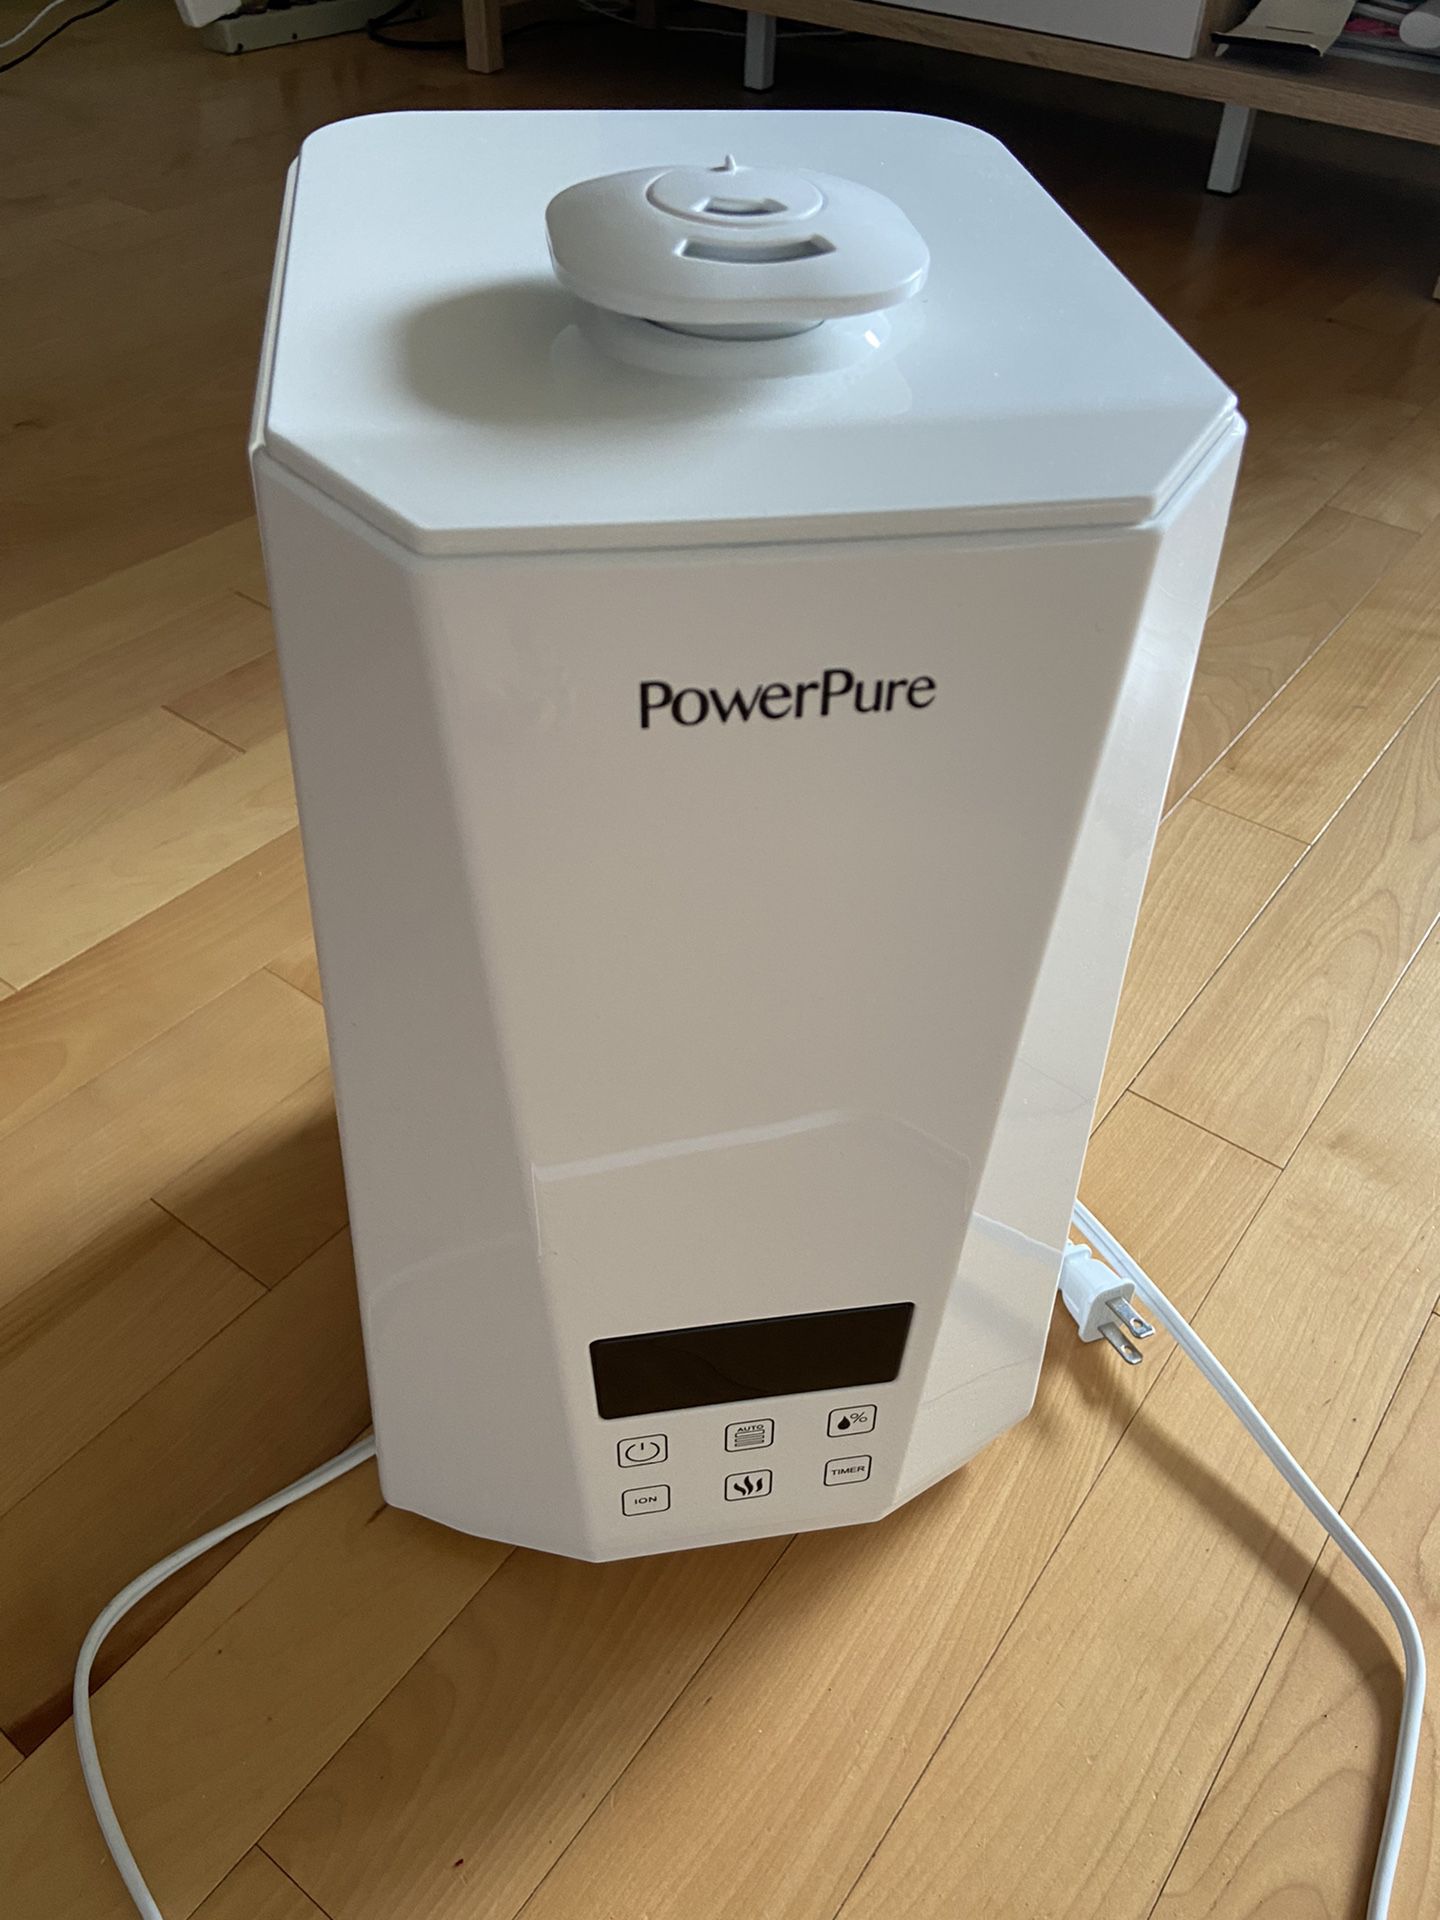 POWER PURE 5000 HUMIDIFIER - USED ONCE